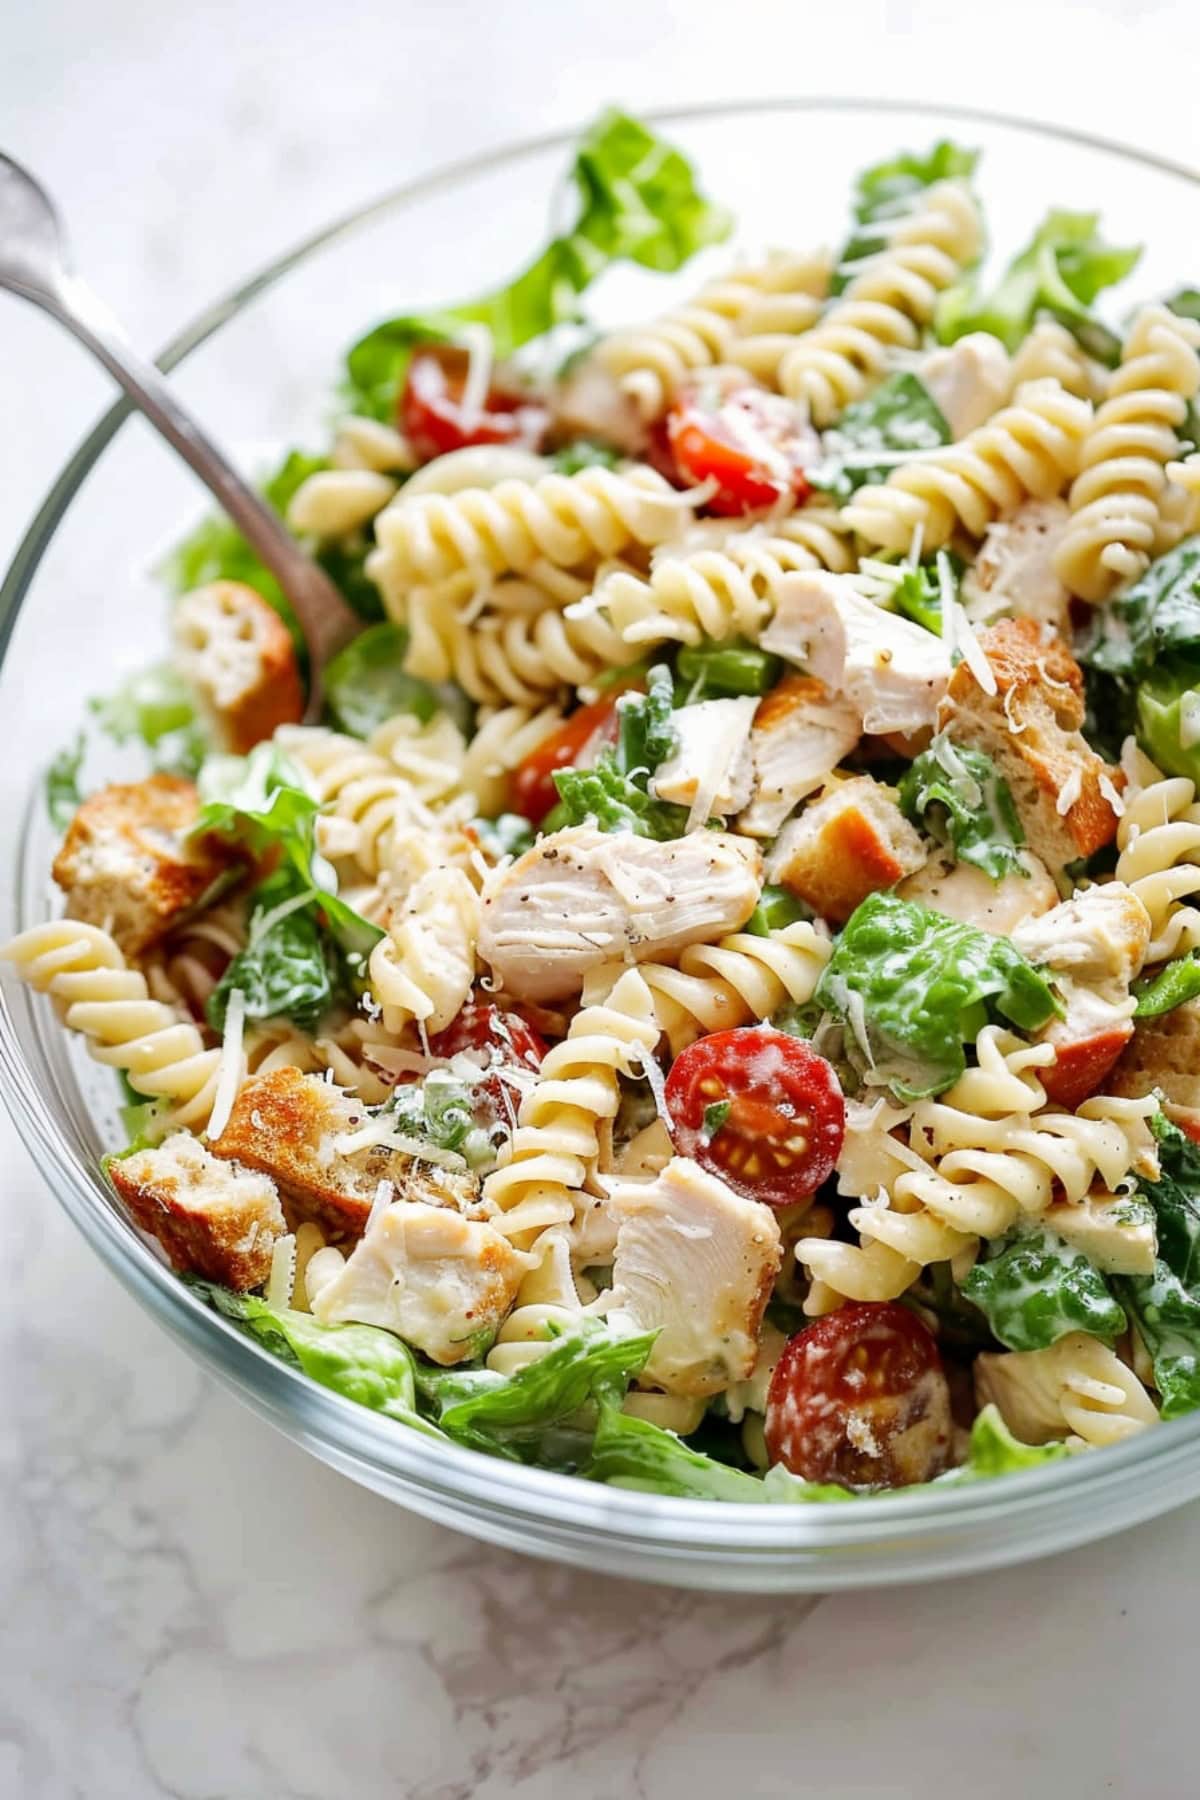 A glass bowl of chicken Caesar pasta salad with croutons, cherry tomatoes and lettuce.